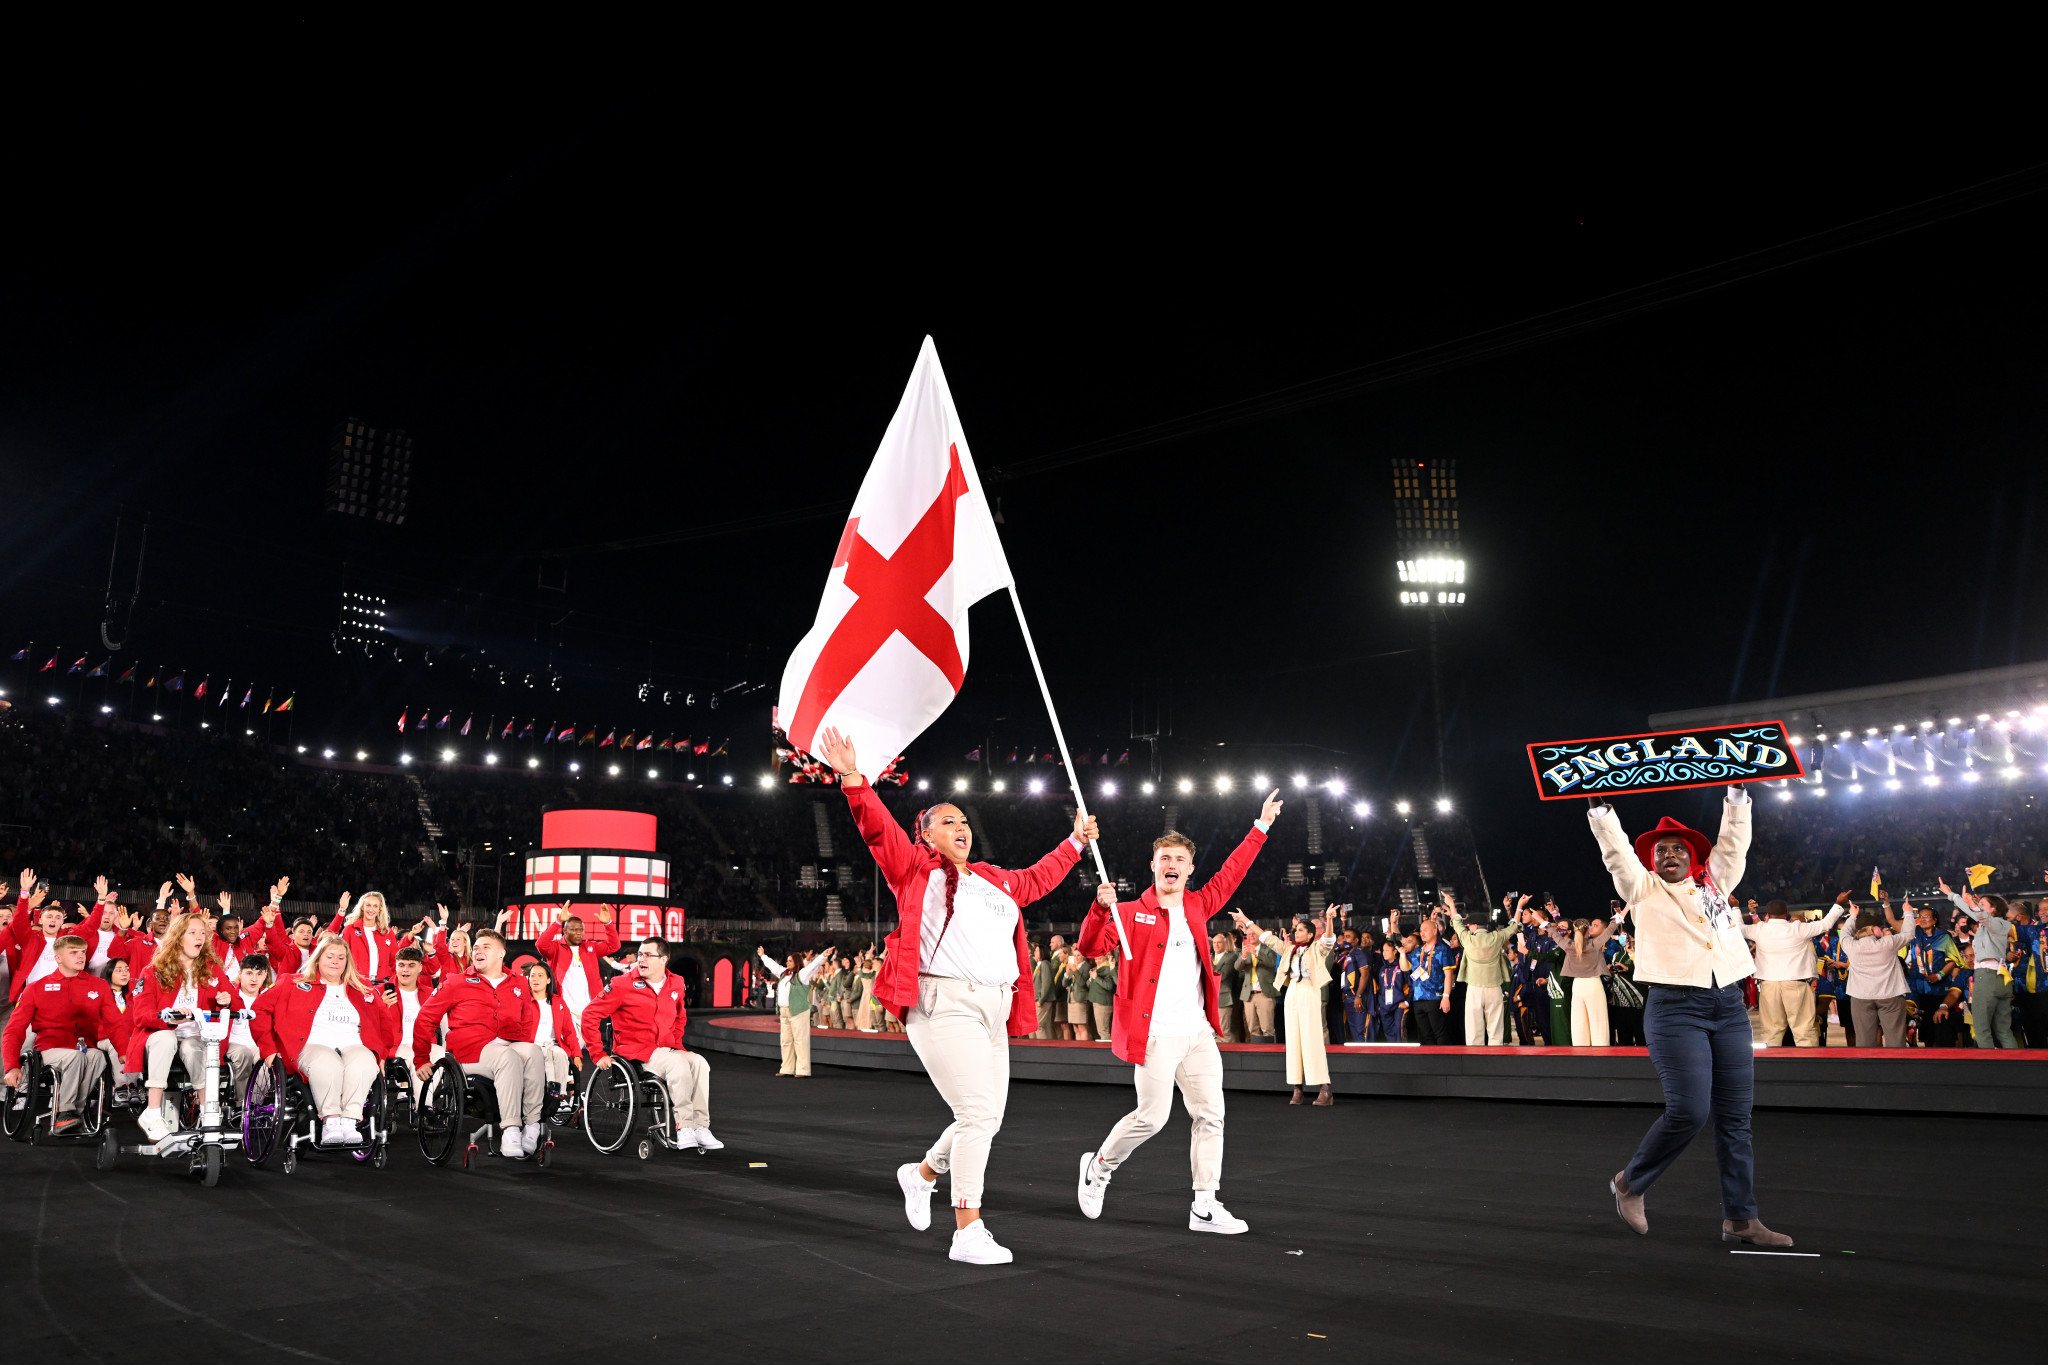 Emily Campbell carried the host nation's flag at the Birmingham 2022 Opening Ceremony ©Getty Images